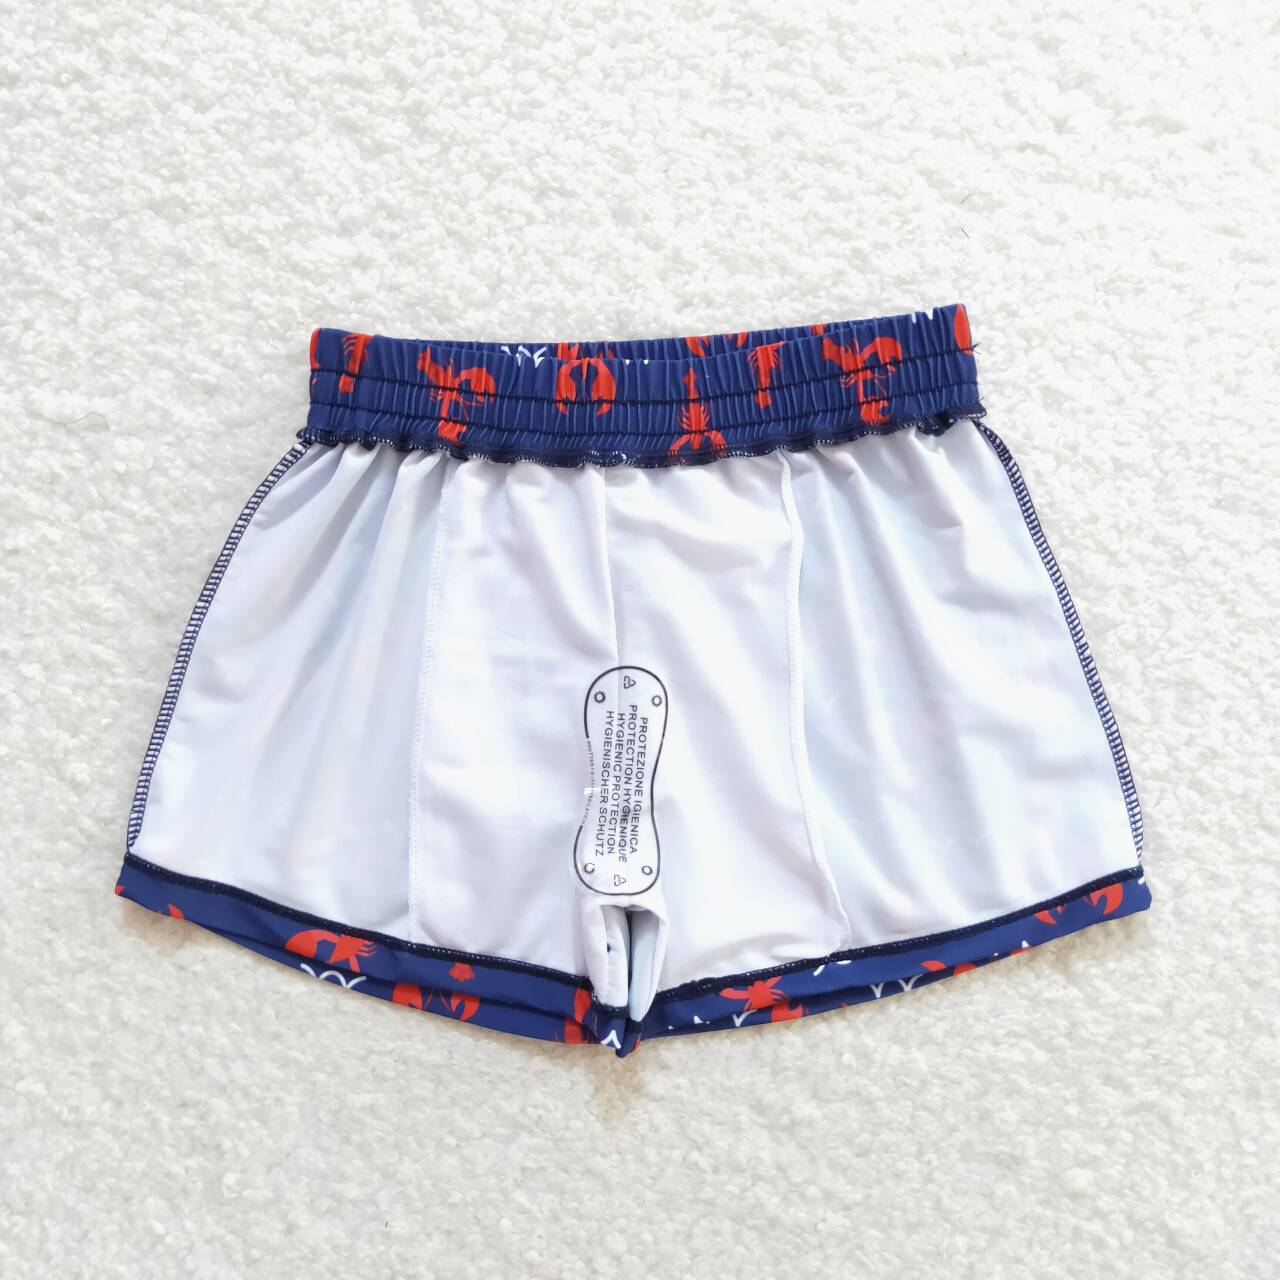 S0270 Red crayfish navy blue swimming trunks